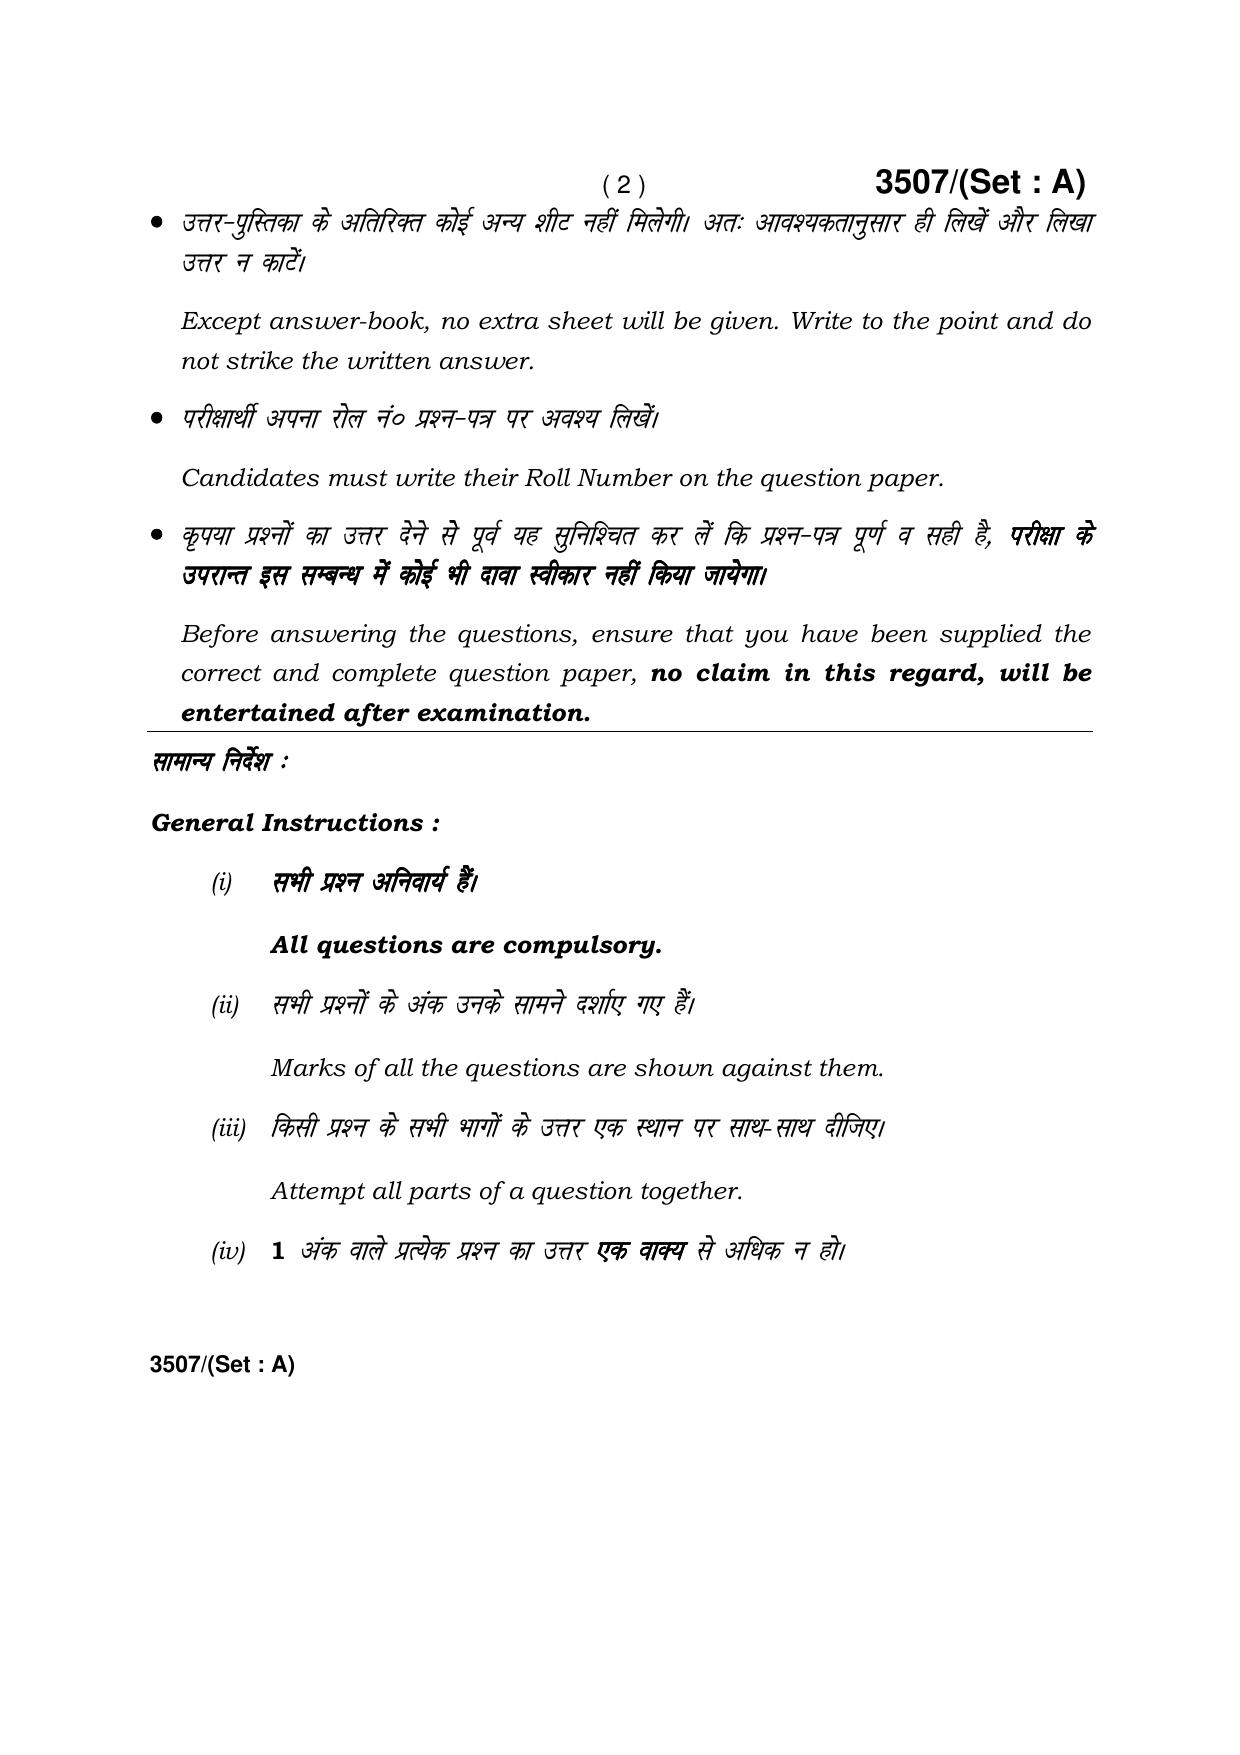 Haryana Board HBSE Class 10 Social Science -A 2018 Question Paper - Page 2